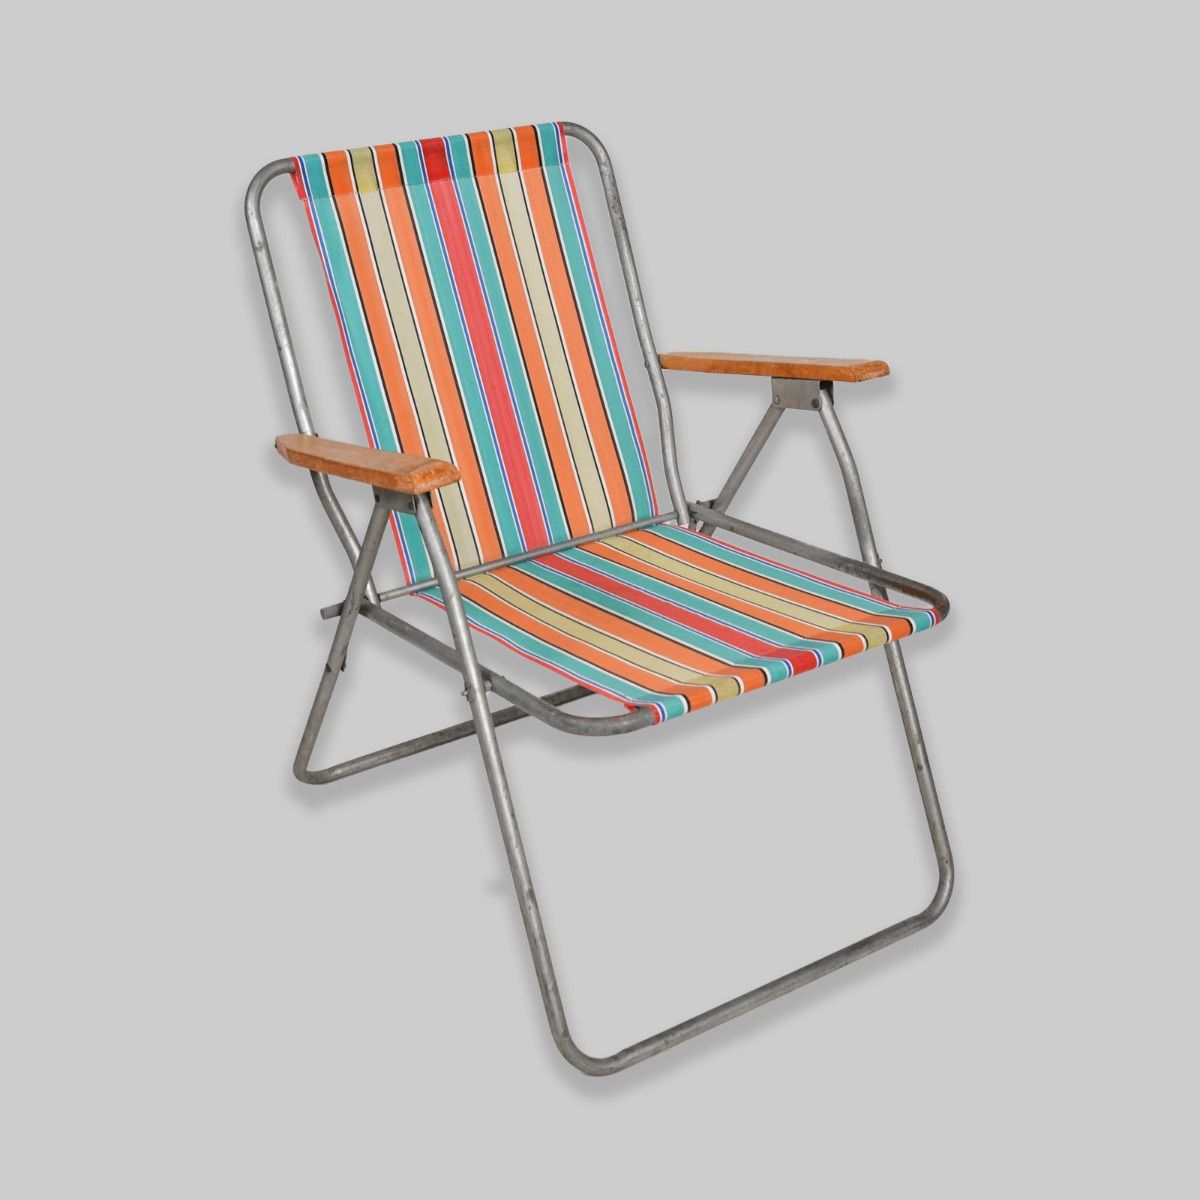 Vintage 1970s Multicoloured Striped Deck Chair